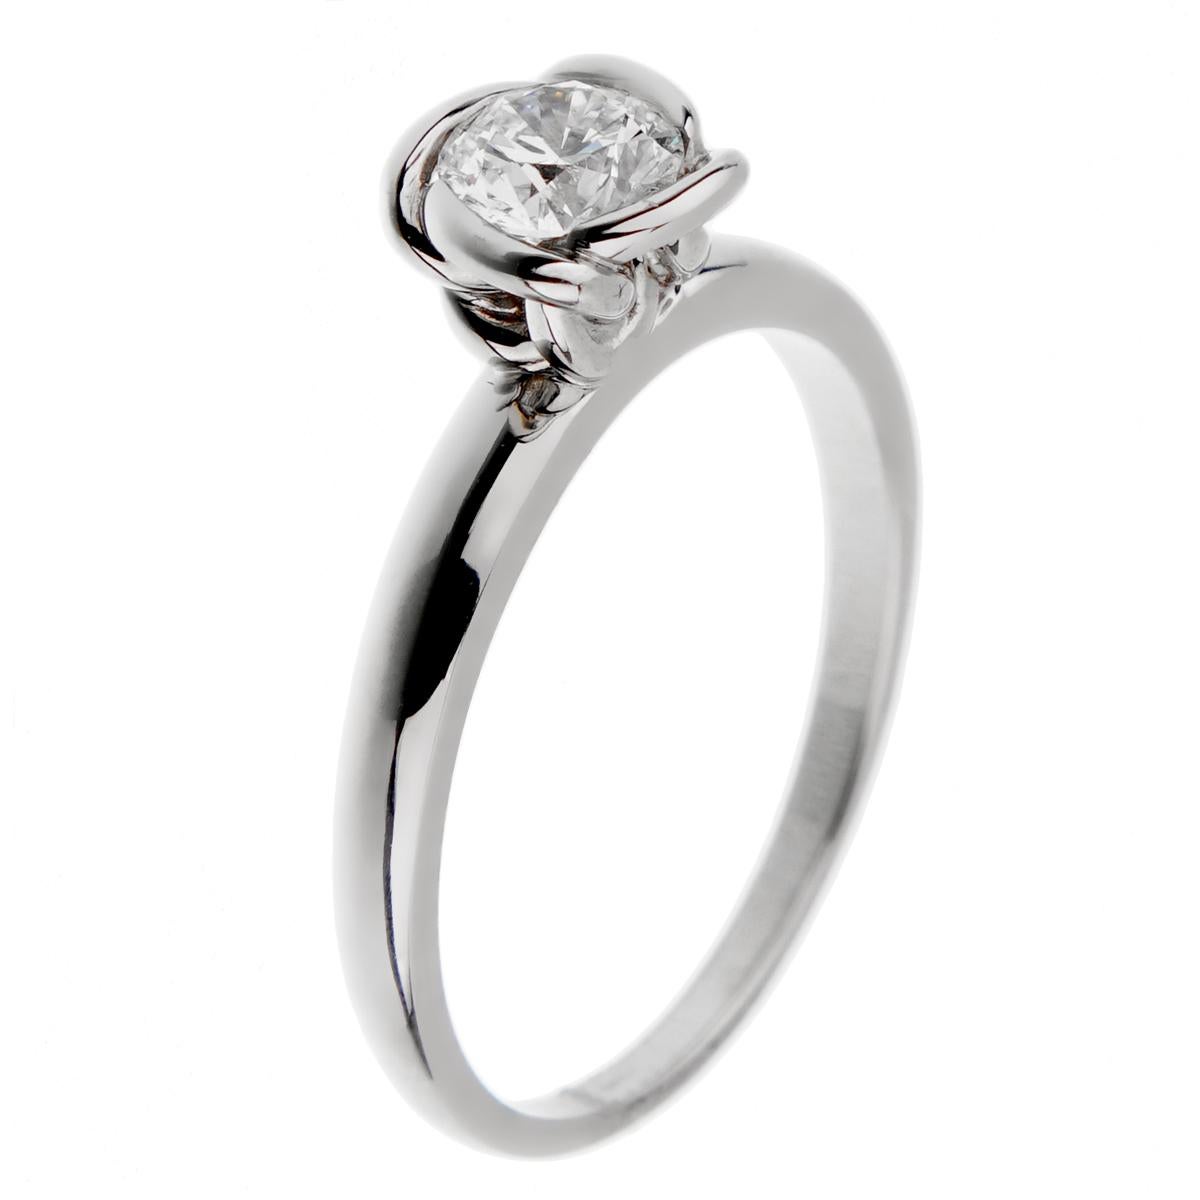 A chic Fred of Paris diamond engagement ring from the Fleur Celeste collection showcasing a .51ct GIA certified solitaire D color Vvs1 clarity wrapped in platinum. The ring measures a size 5 3/4 and can be resized.

Retail: $8650
Sku: 2796